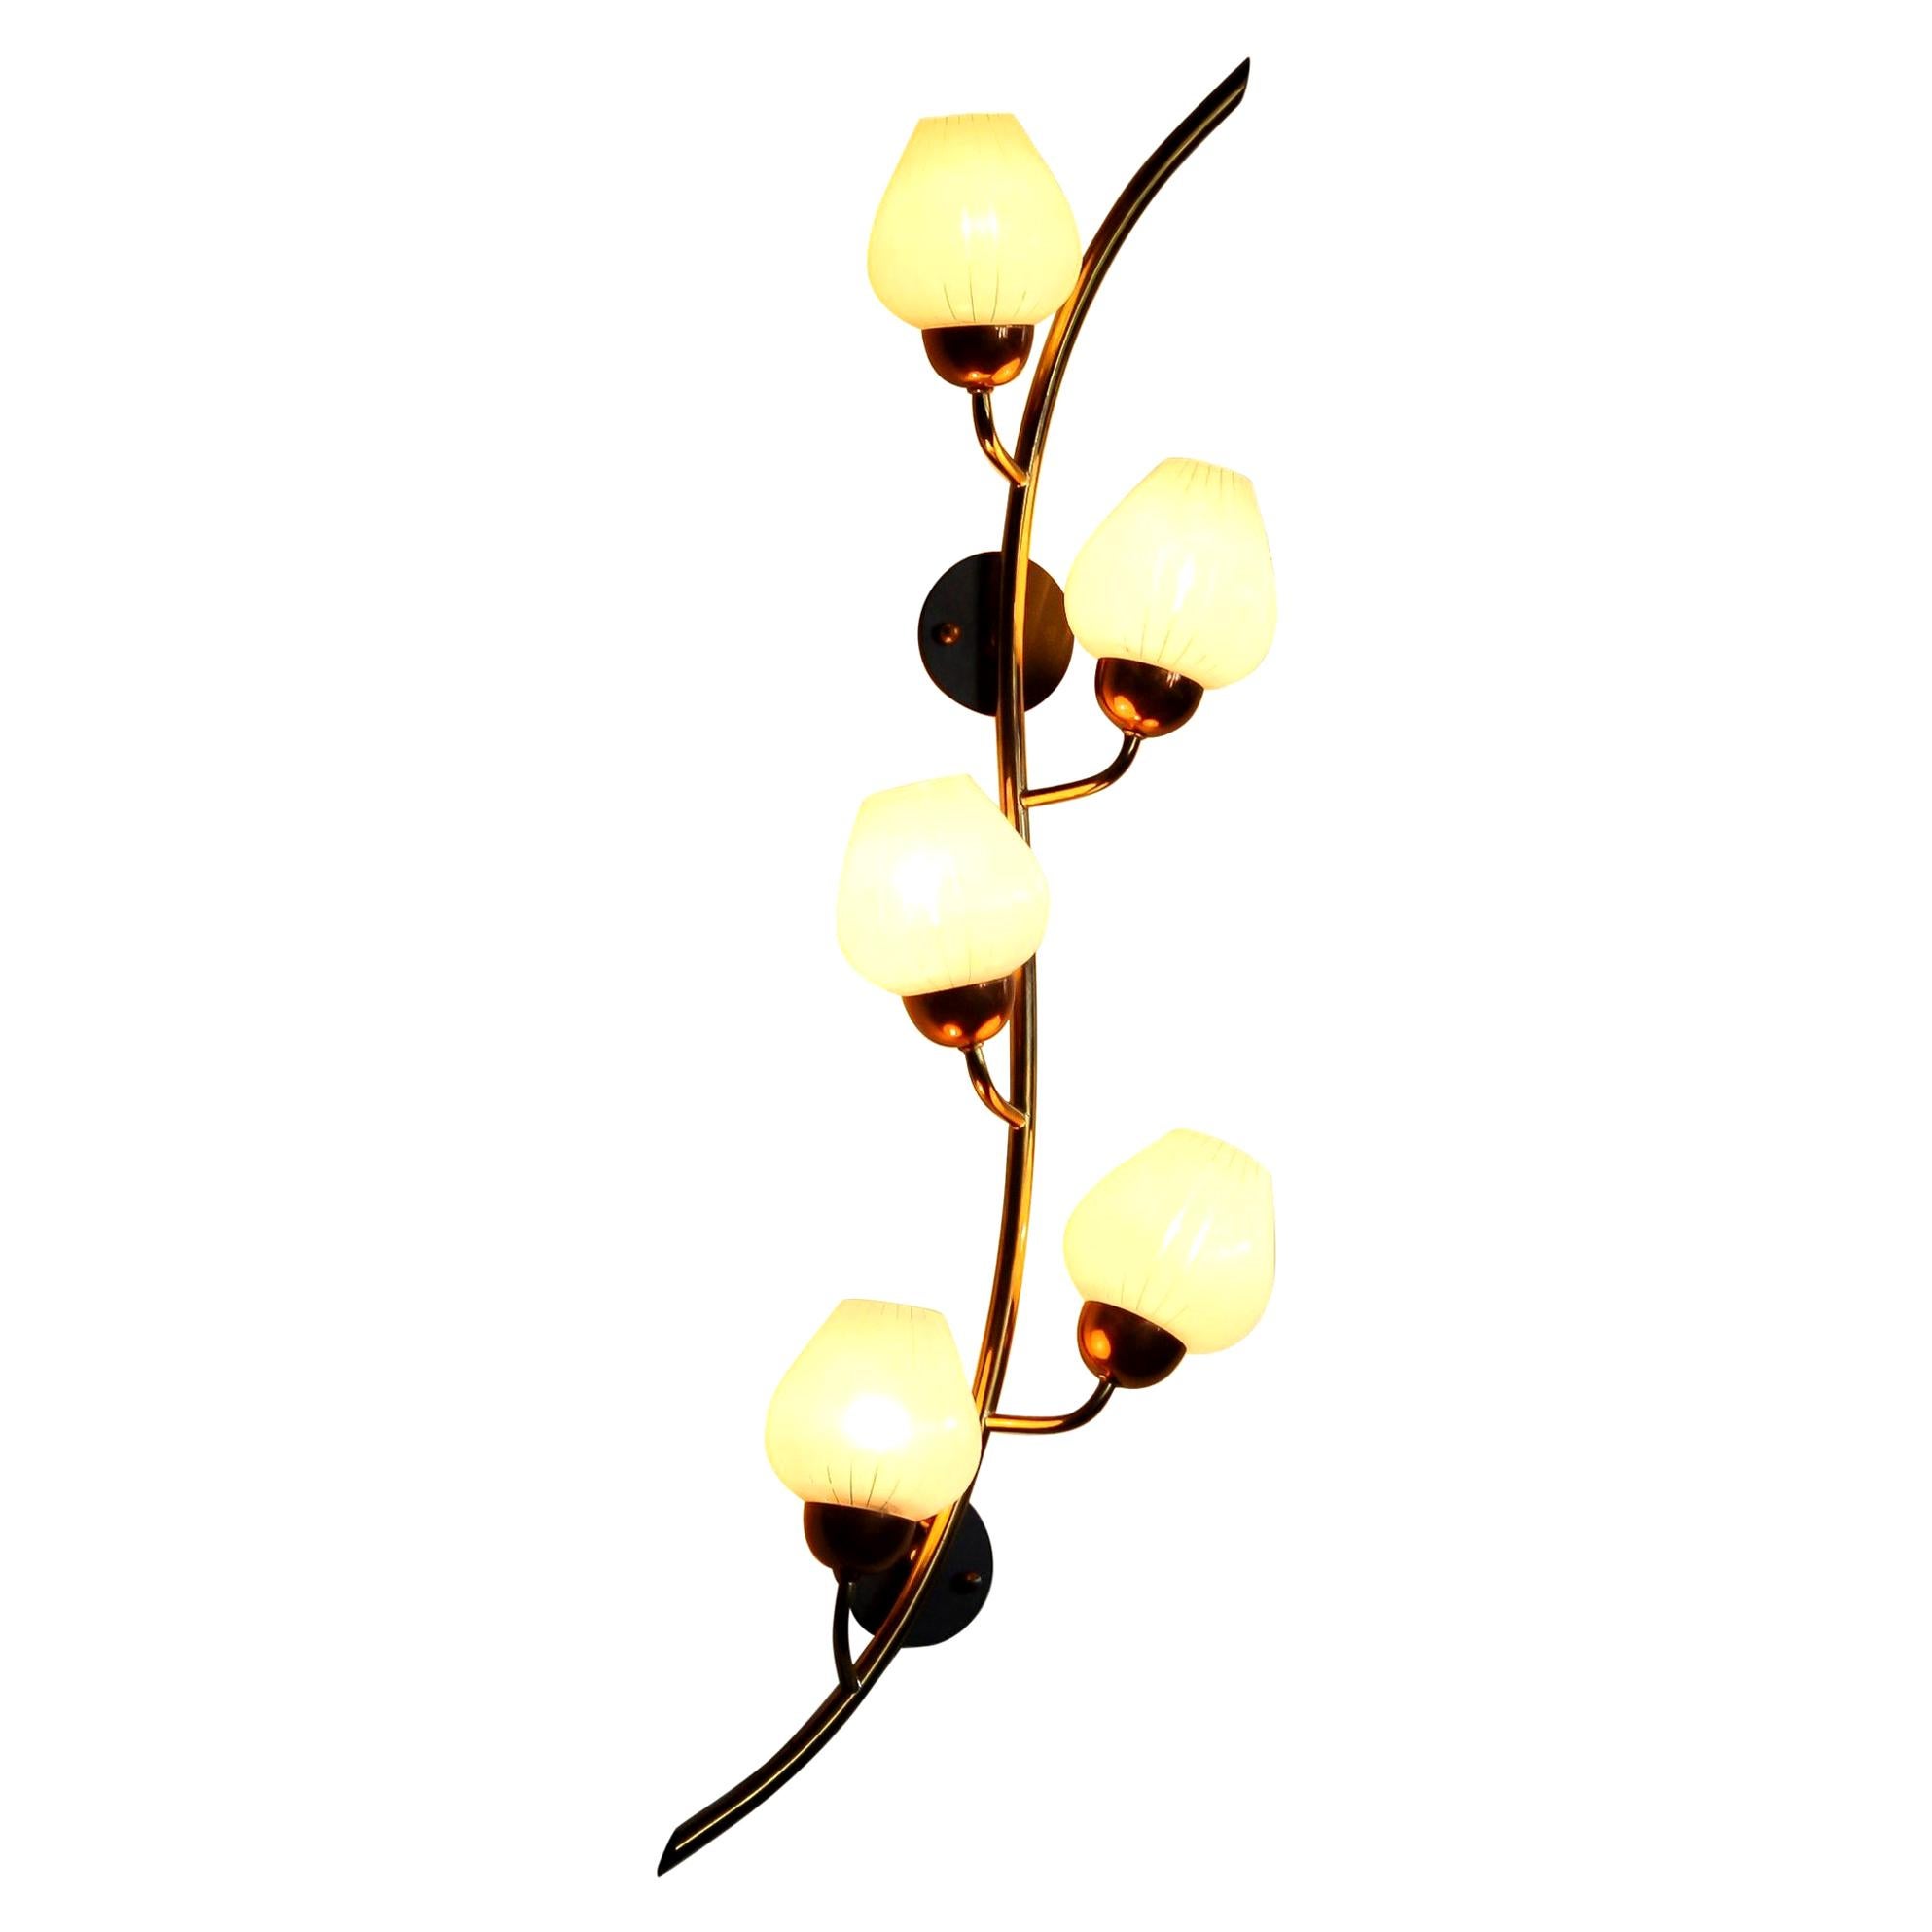 Beautiful brass wall light from Sweden.
This lamp consists of a copper base with five white glass shades like a branch with berries.
The shades have transparent lines making it a nice shining light.
The lamp is in a very nice and functional